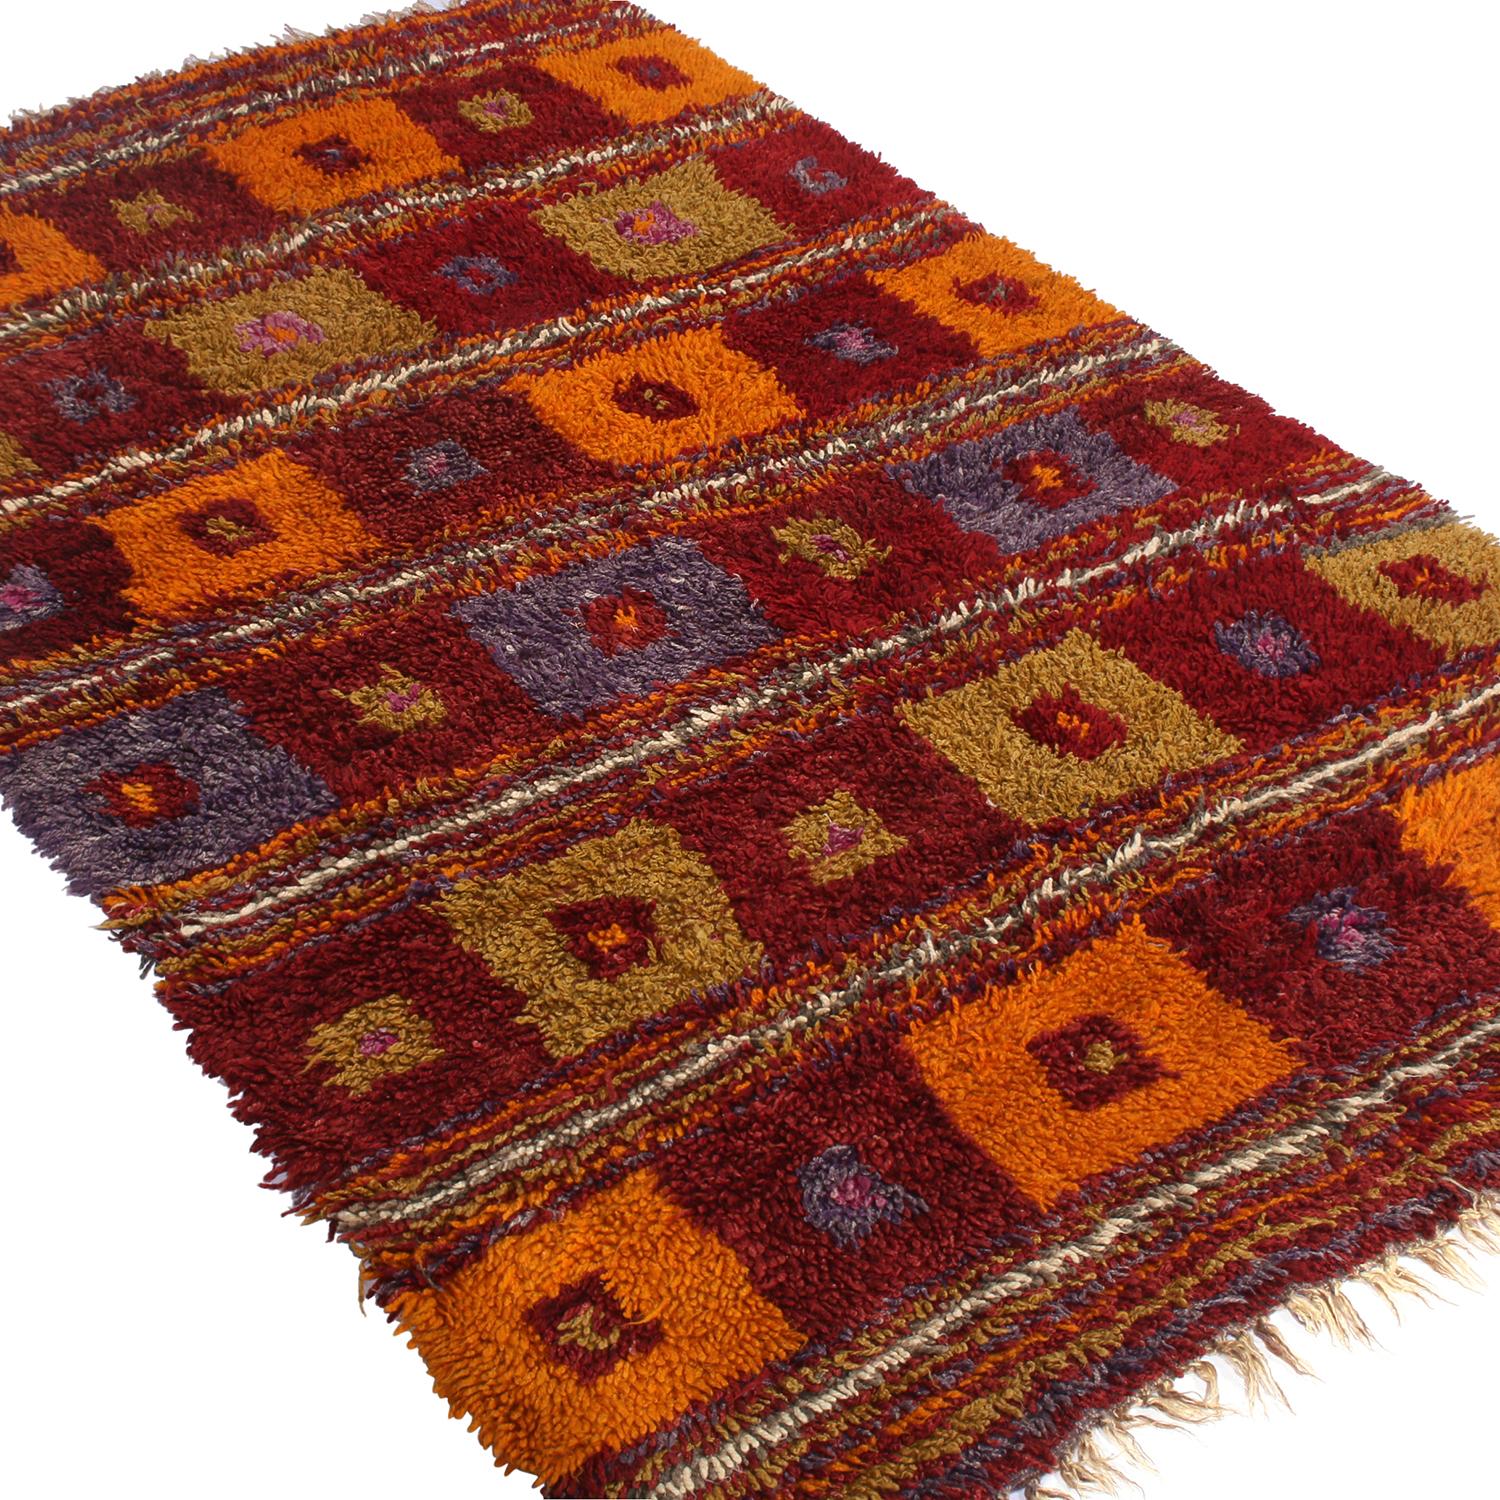 Hand knotted with lush, high pile shag wool originating from Turkey between 1950-1960, this vintage Tulu rug enjoys a fabulous and unique marriage of tribal sensibility with an intriguing range of classic traditional hues. Both the warmth of the